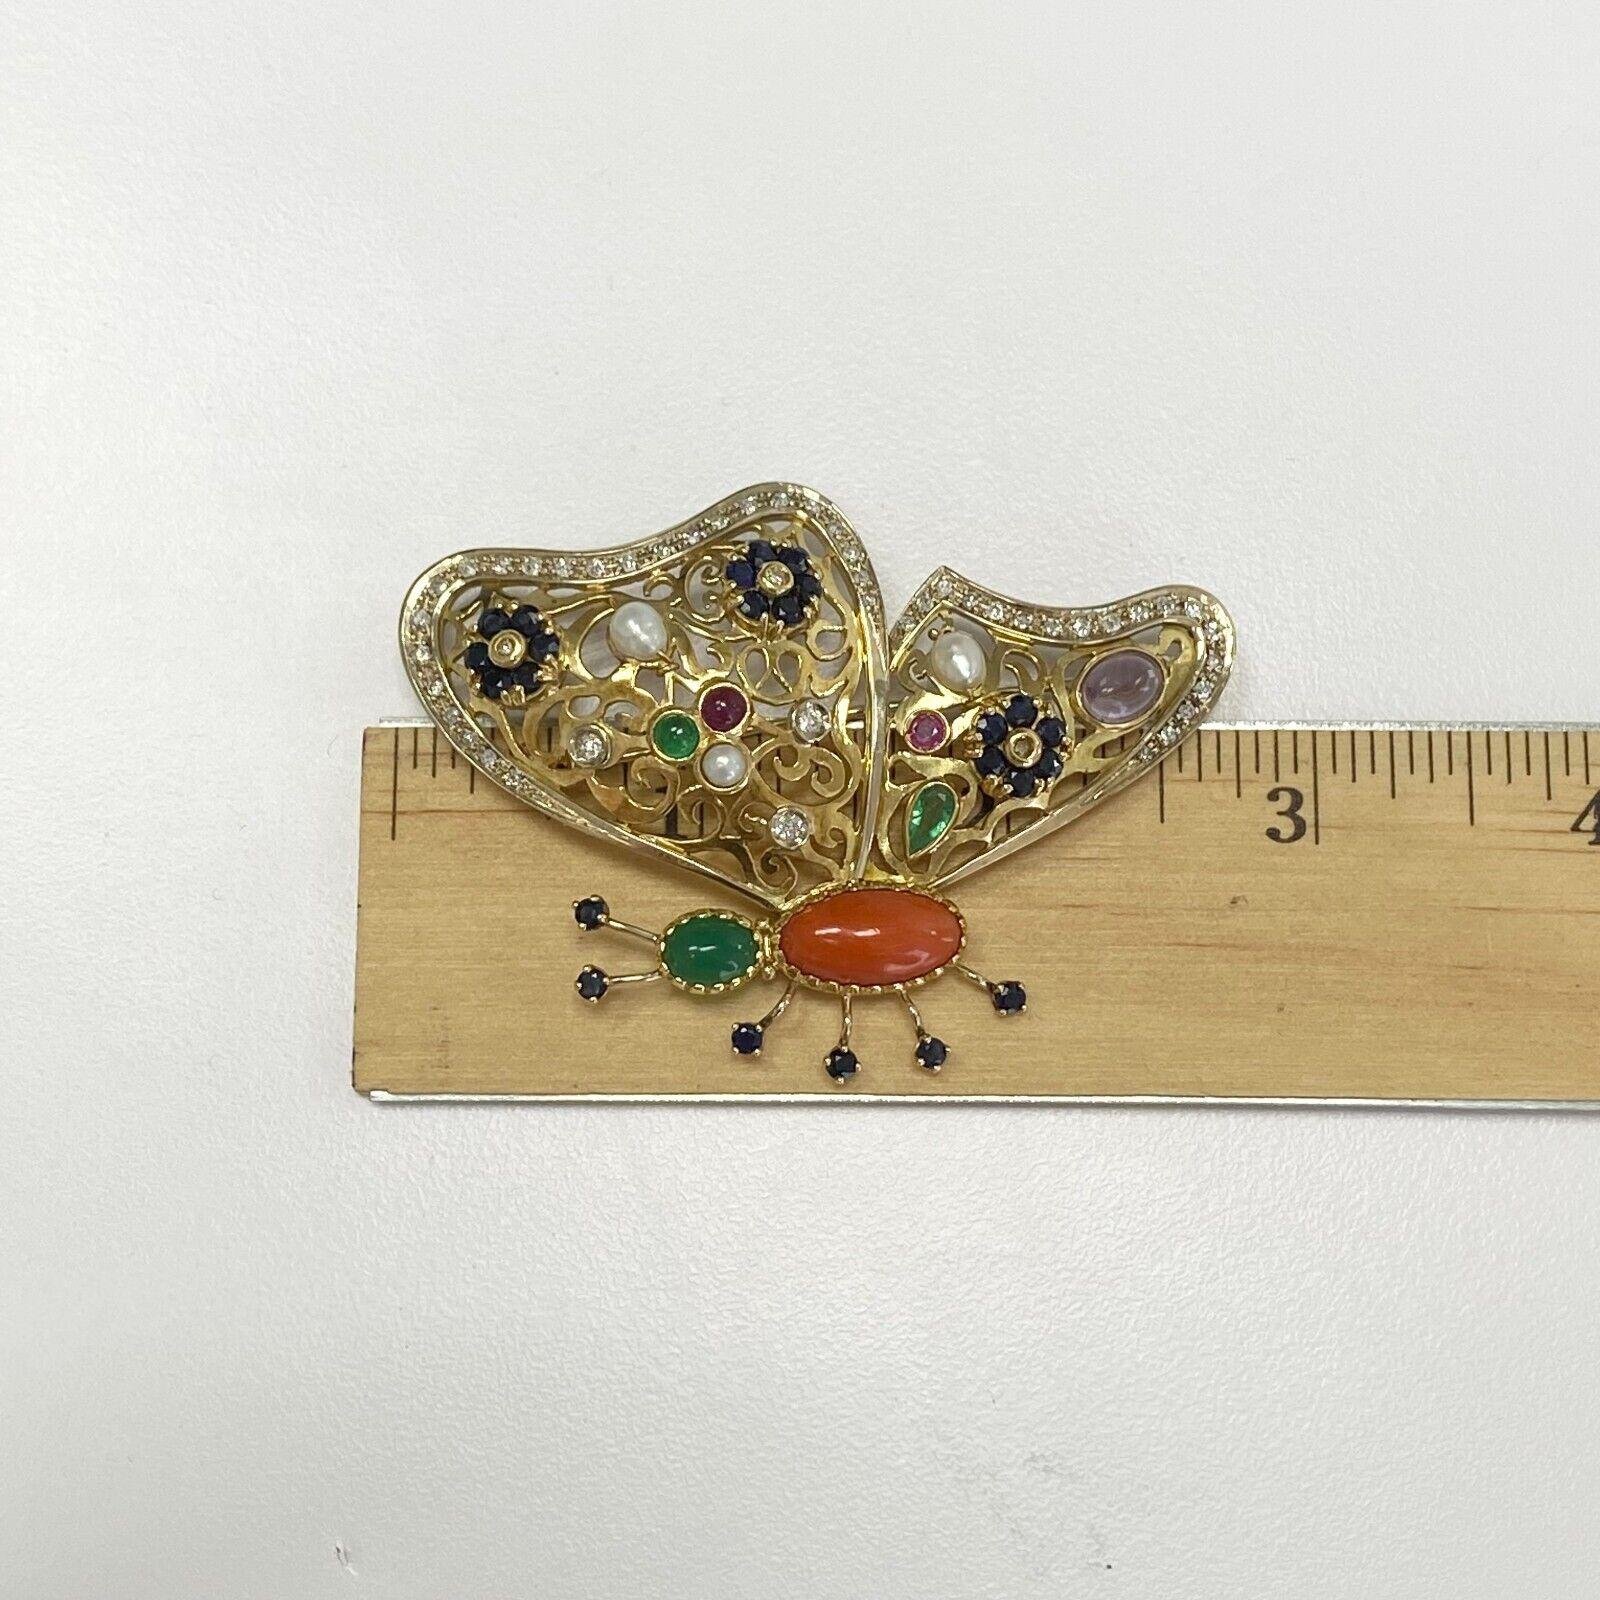 Artisan Antique 18k Gold Butterfly Brooch with Gemstones: Sapphire Diamonds Emerald For Sale